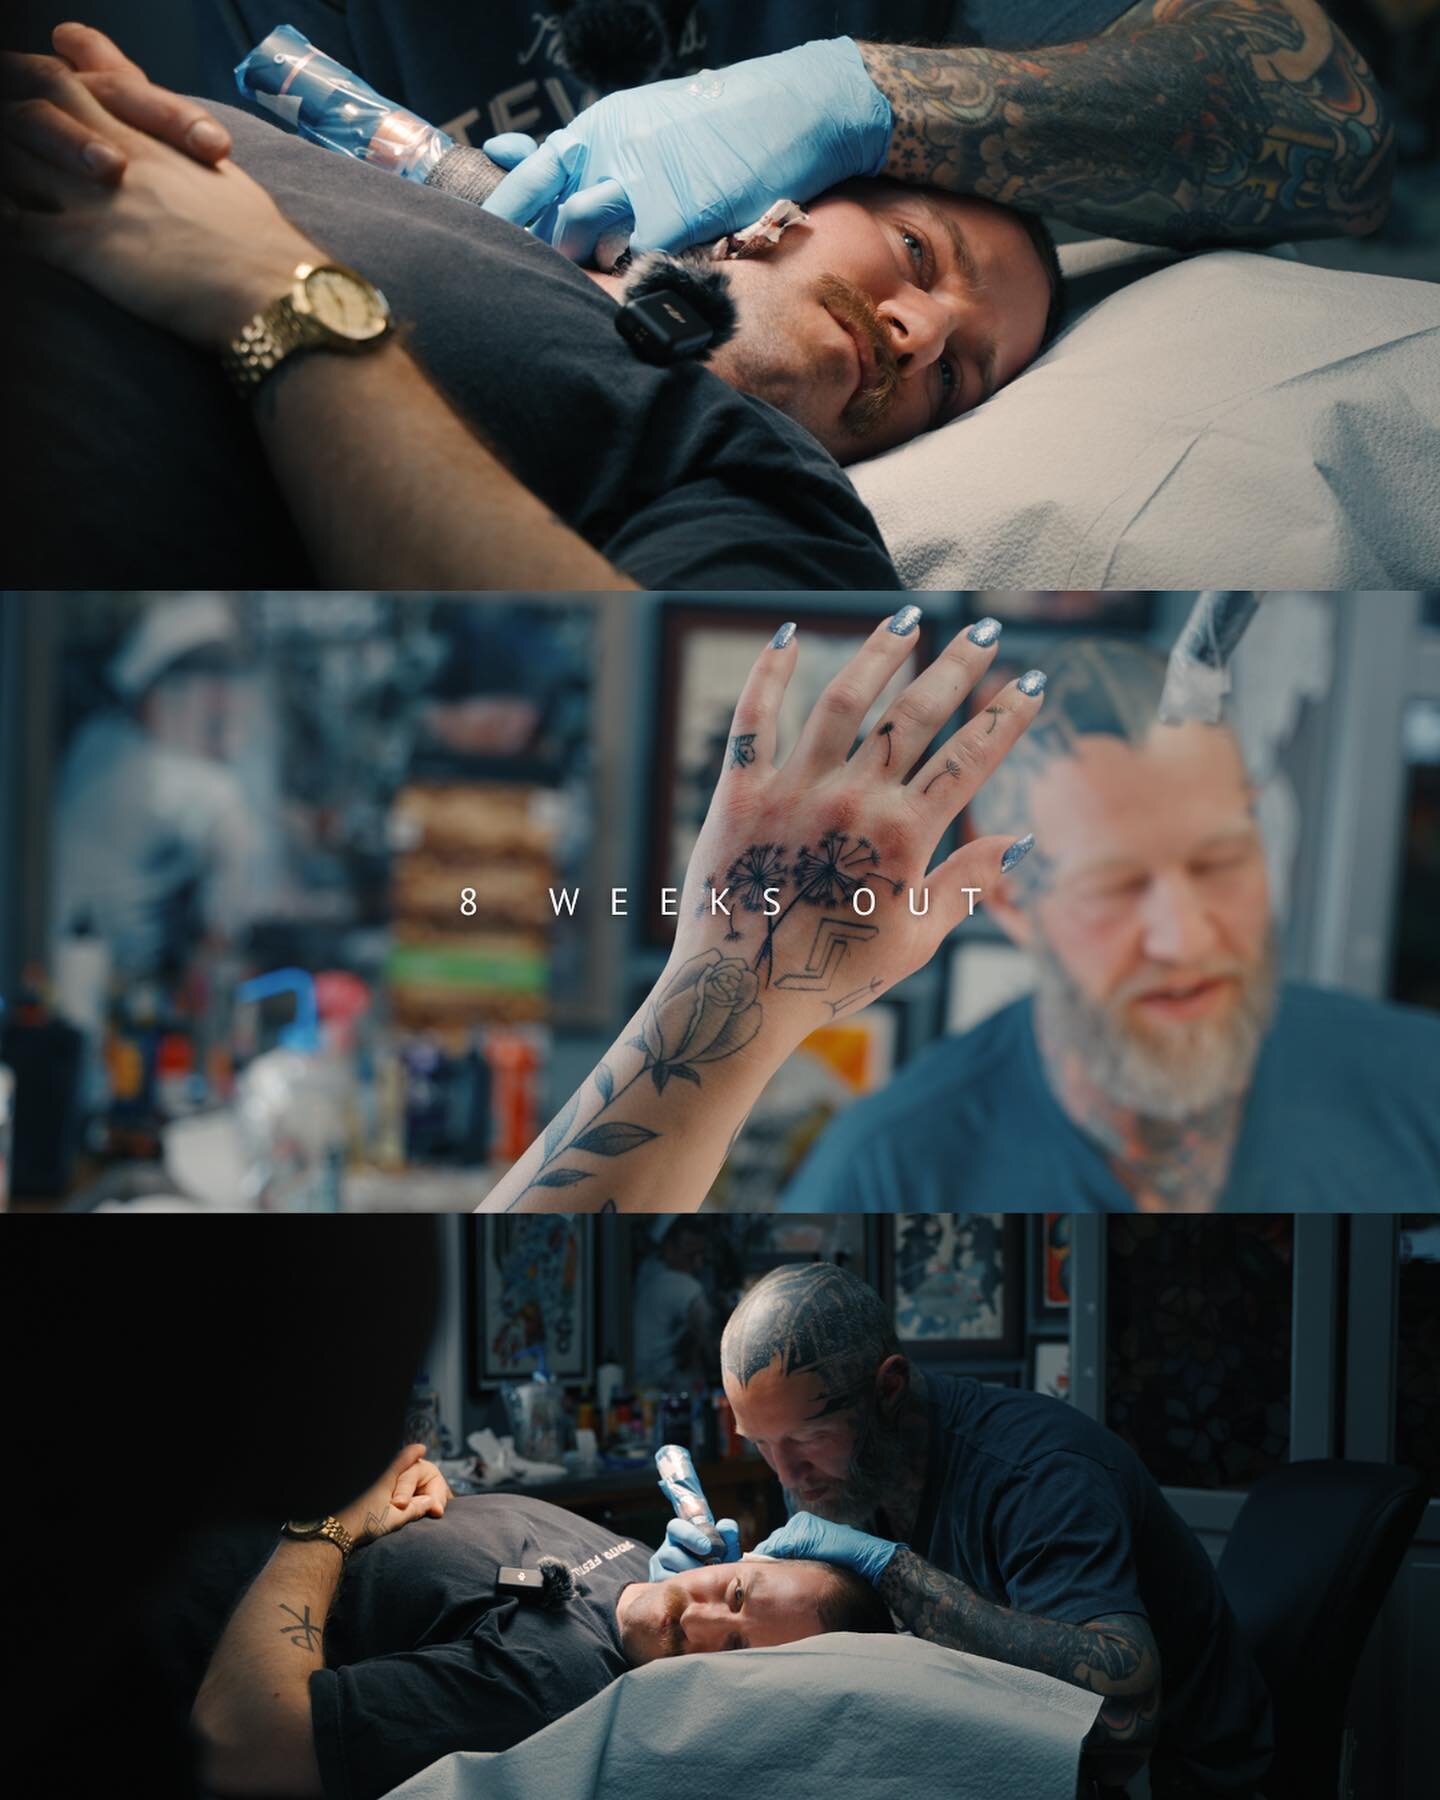 8 Weeks Out. 
.
.
.
.
Some stills from Week 10 of our feature documentary. More stills coming as we get closer to competition day 💪
.
.
.
.
.
#filmmetry #filmmaking #film #productionstills #cinematicvideo #cinematic #cinematicphotography #tattooshop